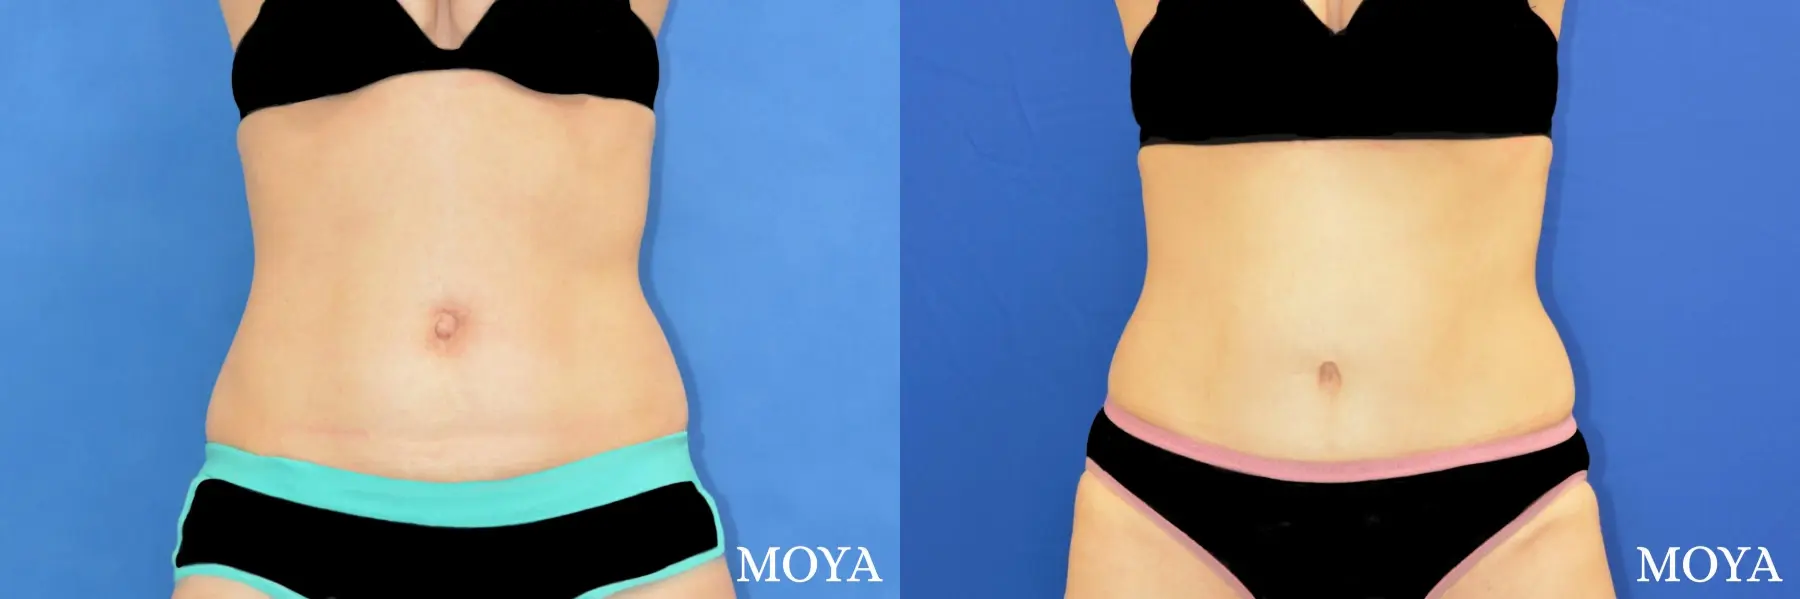 Tummy Tuck (limited) - Before and After 2